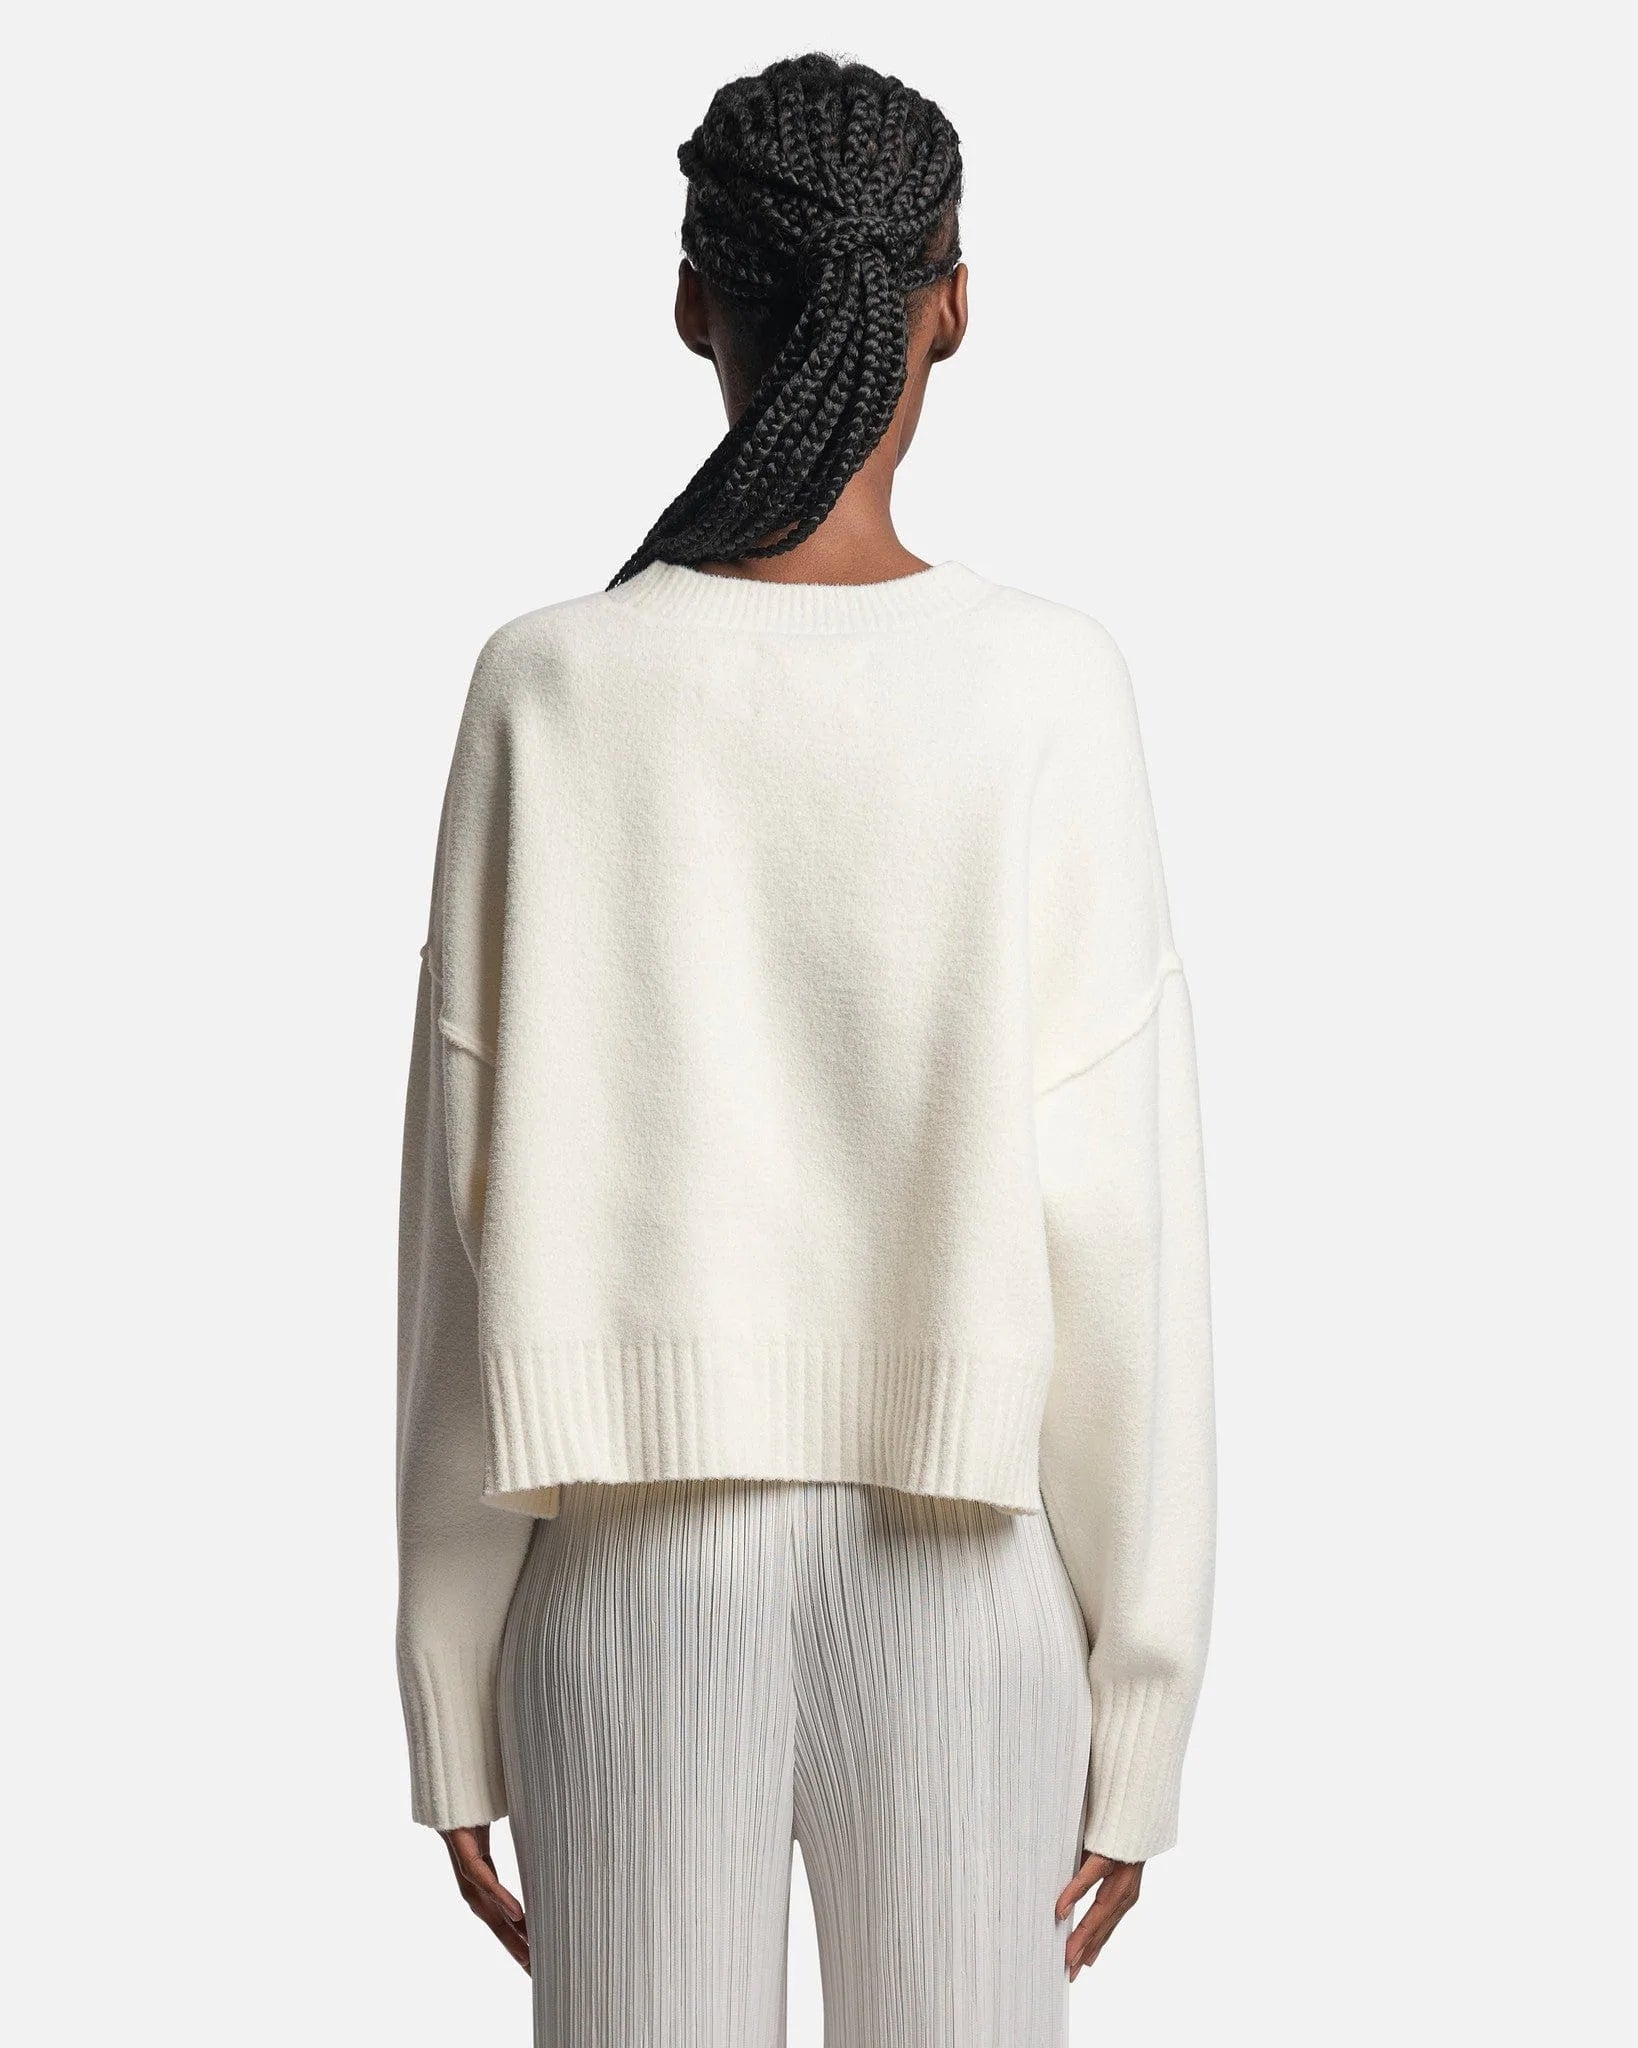 Feng Chen Wang Women Dresses Long Sleeve Deconstructed Sweater in White